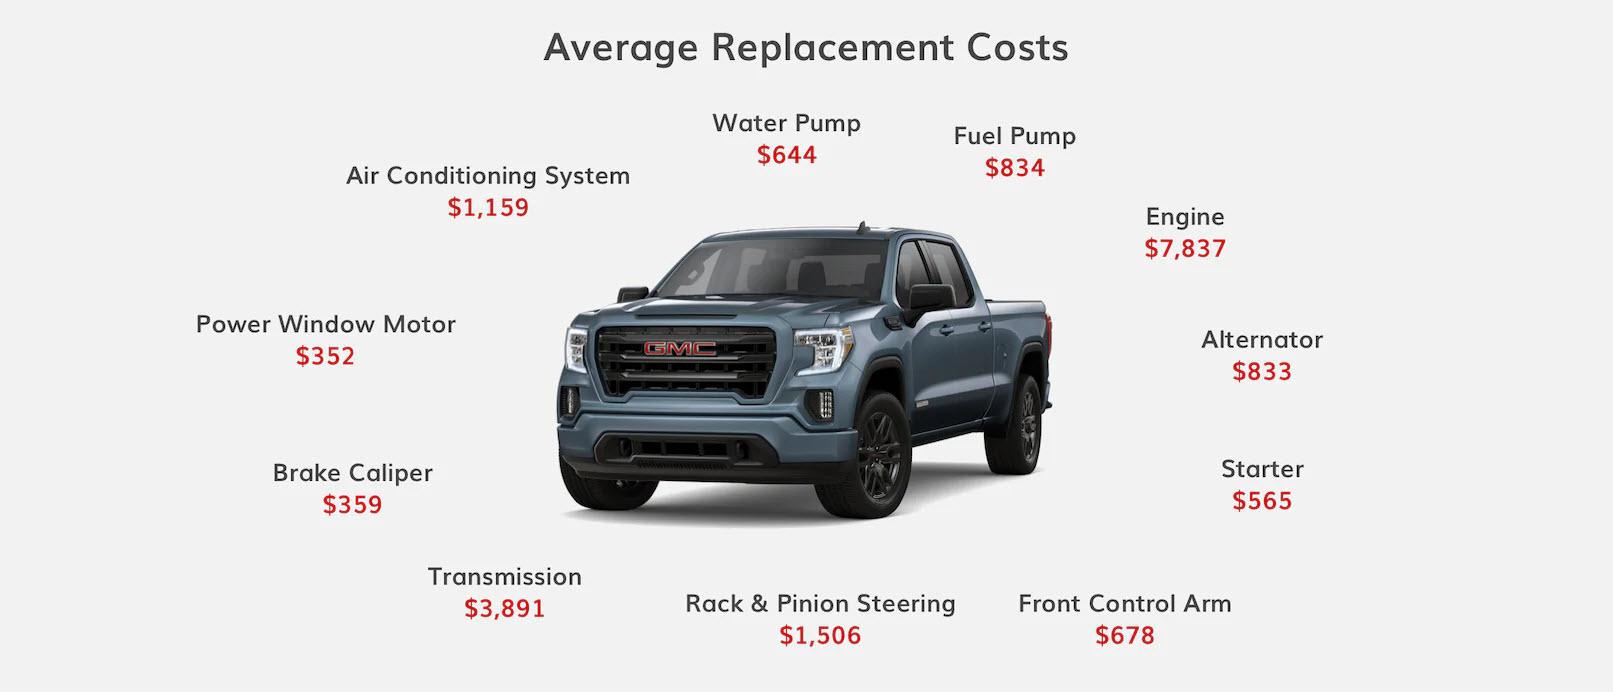 GMC Average Replacement Costs